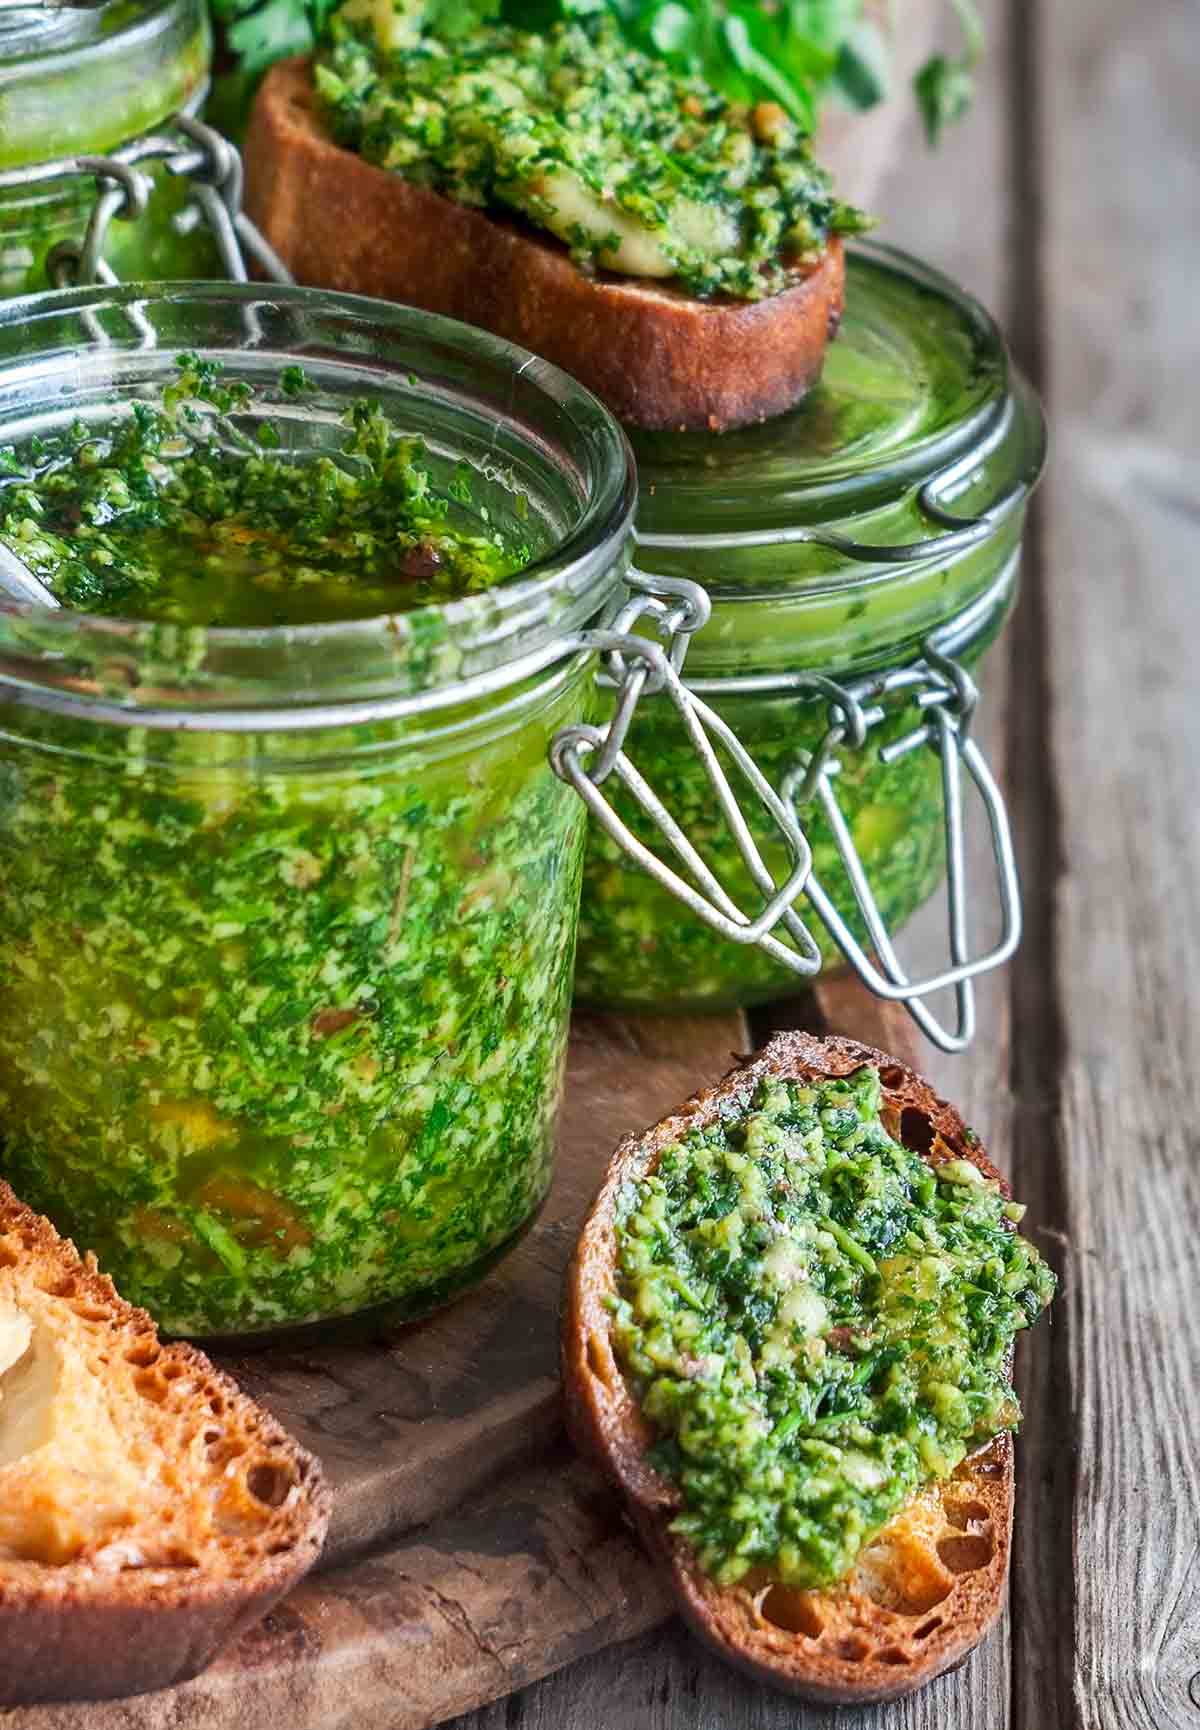 Several jars of cilantro sauce and a few toasted bread rounds topped with the cilantro sauce on a wooden board.